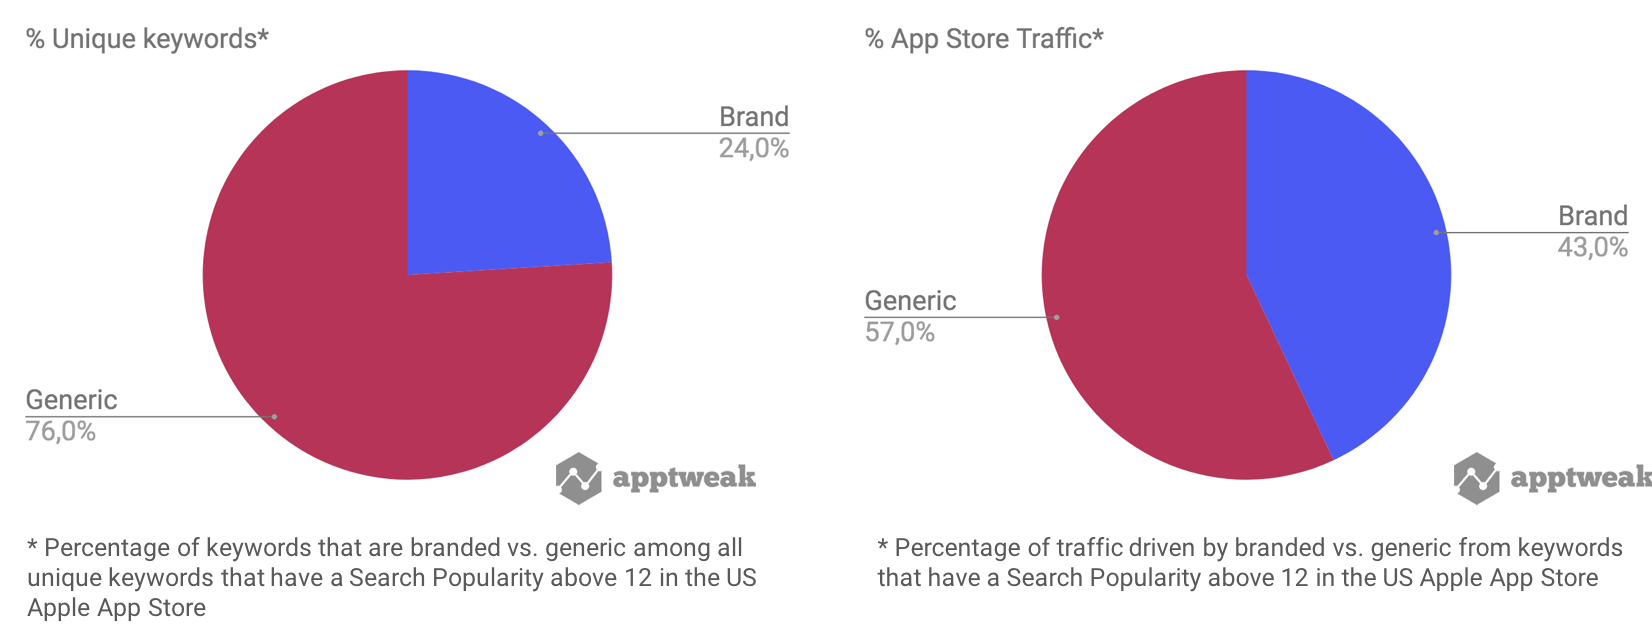 Comparing the % of unique keywords that are brand and generic against the traffic they drive in the US Apple App Store